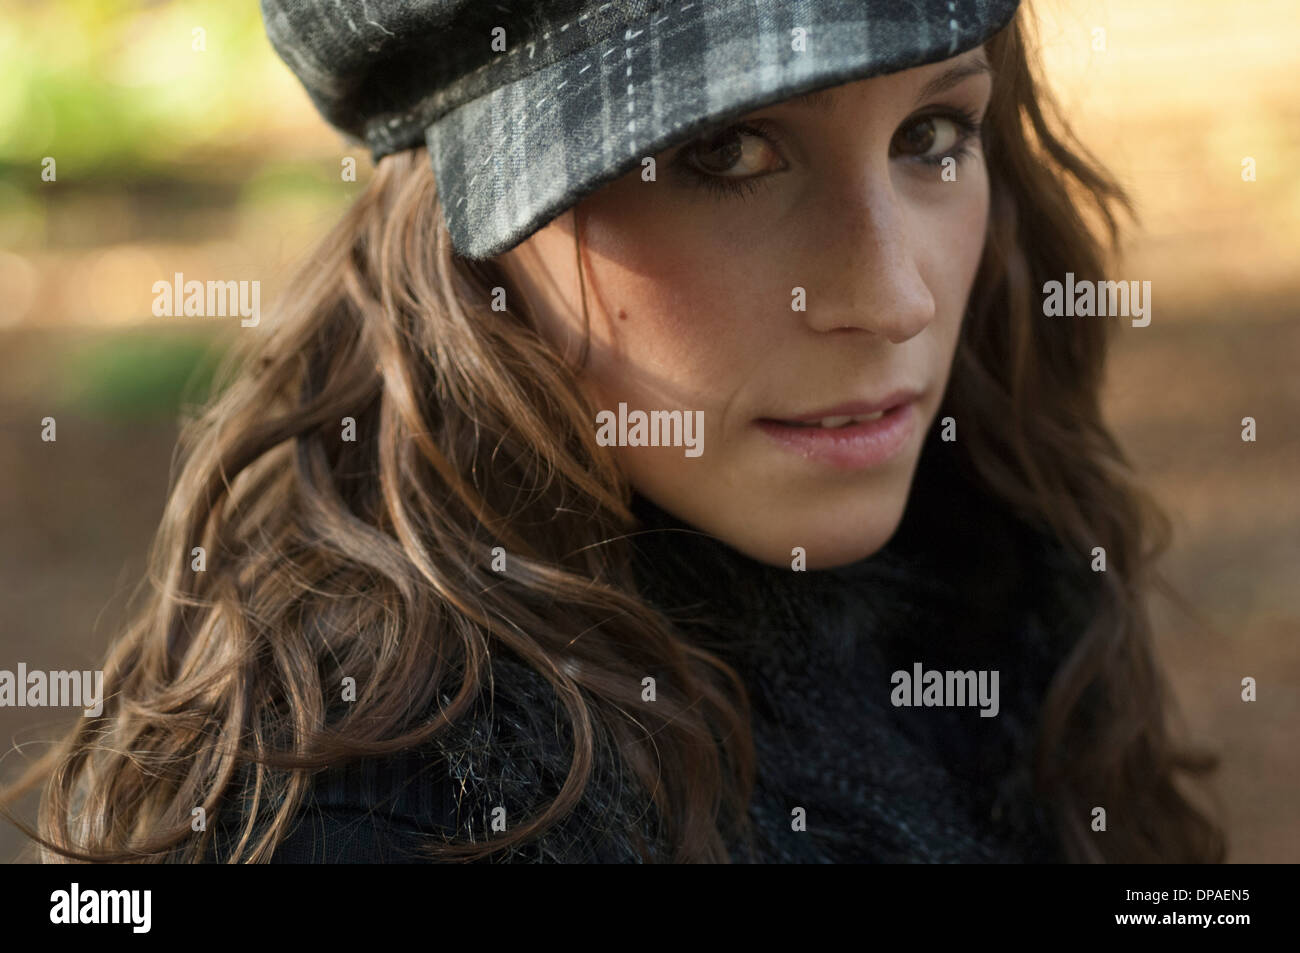 Portrait of young woman wearing hat, close up Stock Photo